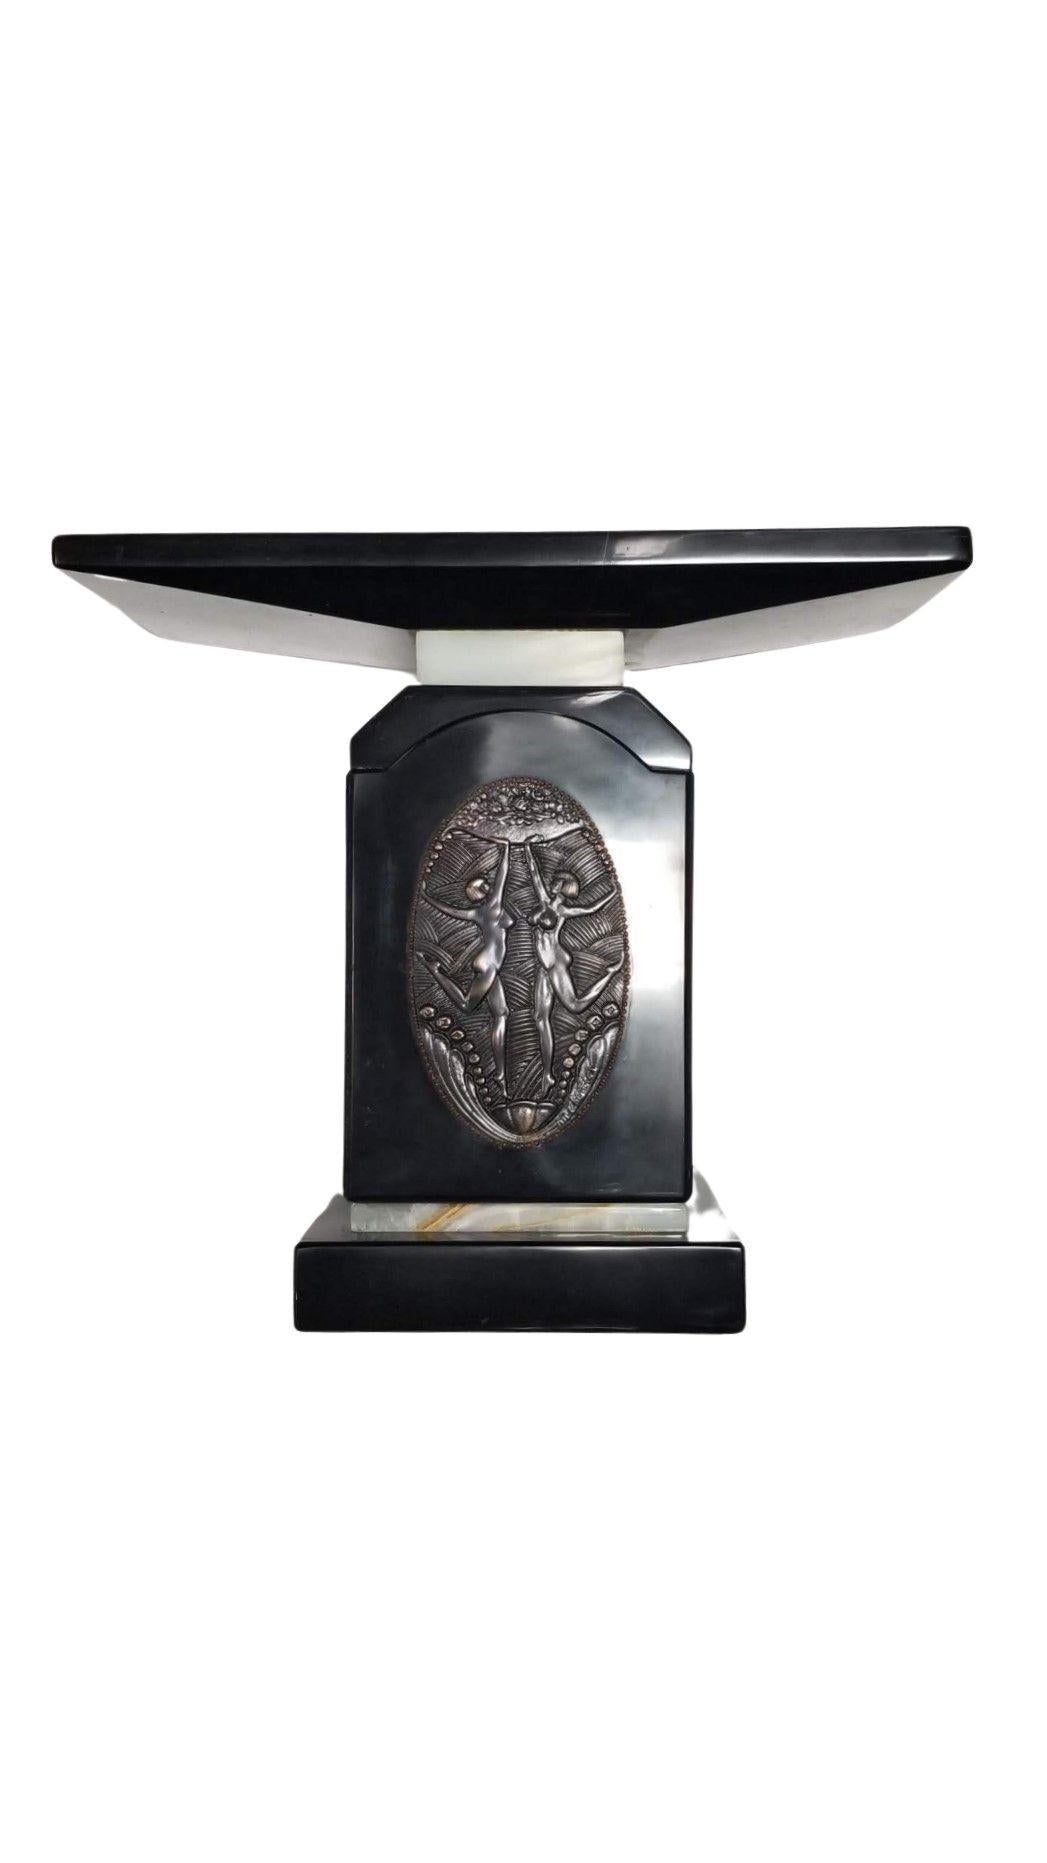 Art Deco tabletop display pedestal in Black Marble with dancer relief and white marble trim in the style of Demetre Chiparus (unsigned)
Demétre Chiparus was a Romanian sculptor who lived from 1886 to 1947. He is best known for his Art Deco